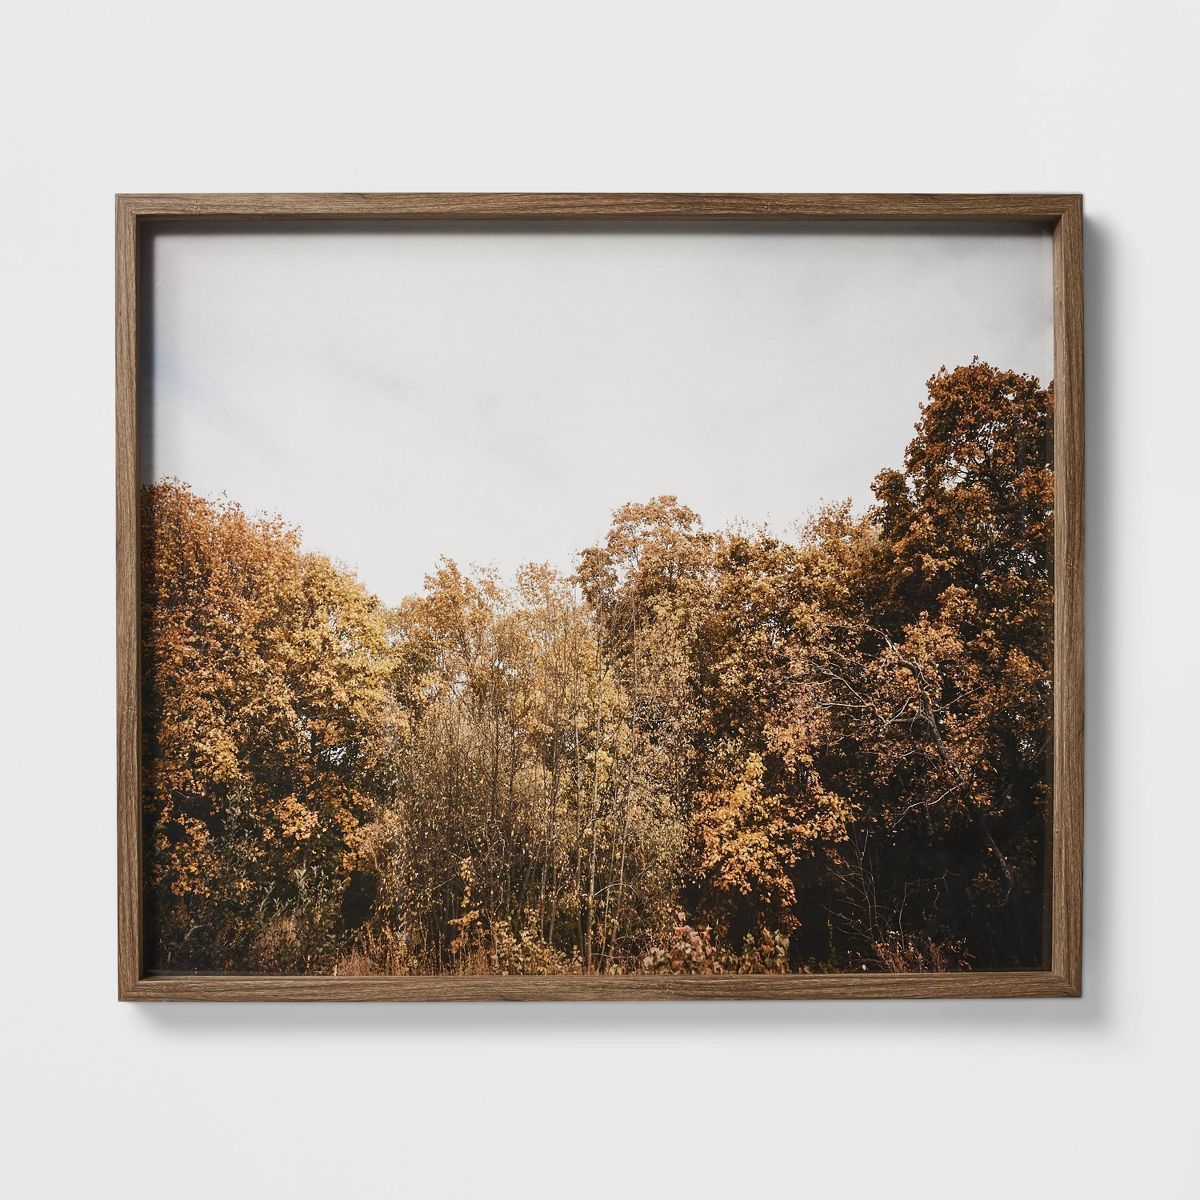 36" x 30" Golden Forest Framed Wall Art - Threshold™ designed with Studio McGee | Target